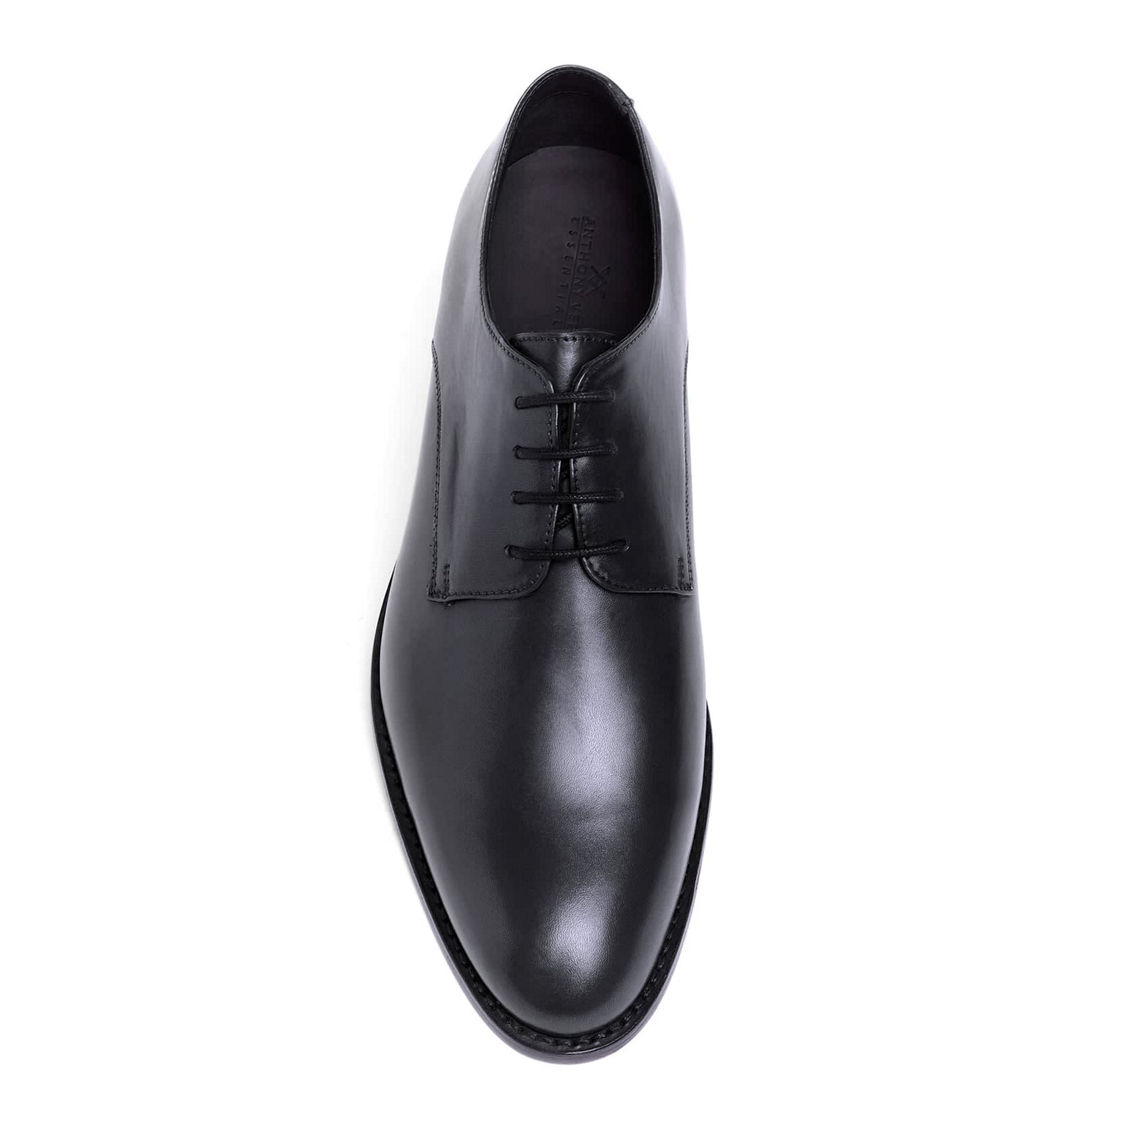 Anthony Veer Mens Truman Derby Goodyear welt Lace-up Dress Shoe - Image 3 of 5